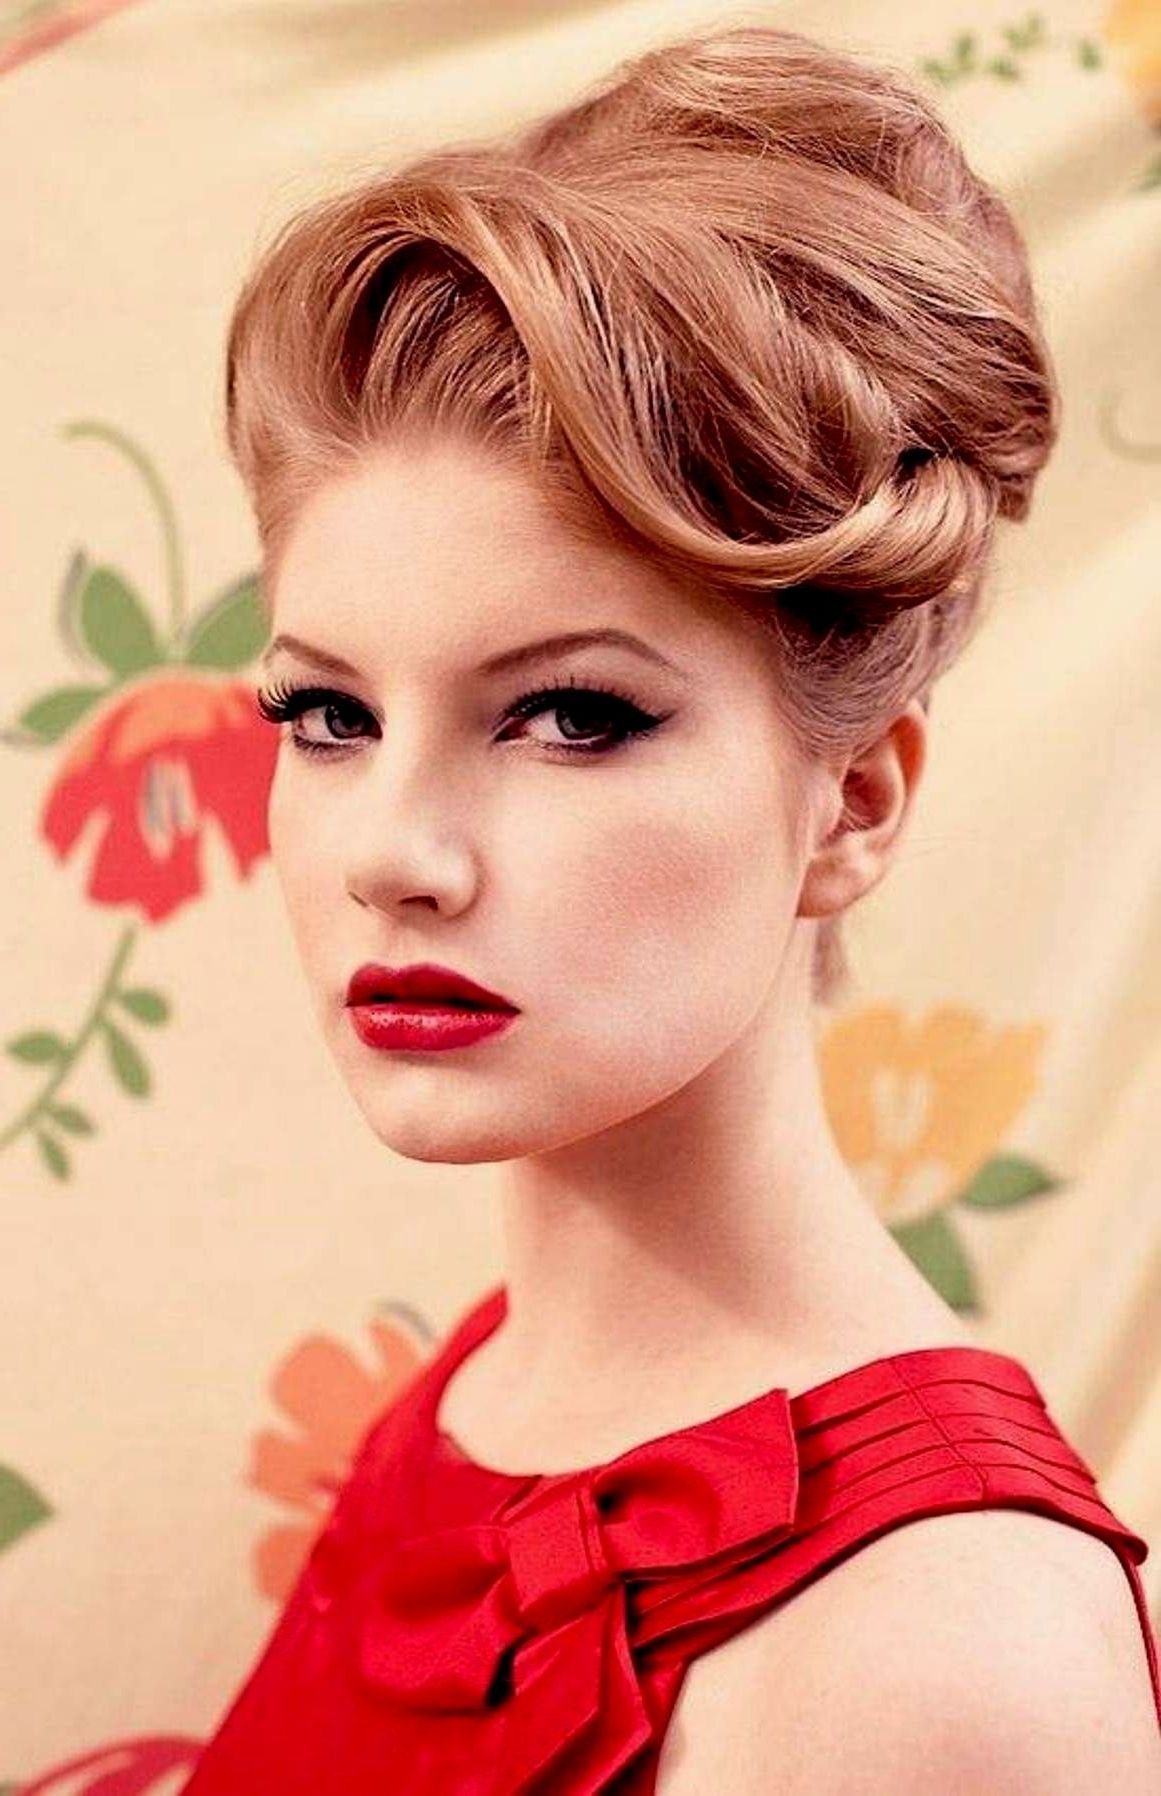 80's Updo Hairstyles | Hairstyles Ideas With Regard To 80s Hair Updo Hairstyles (View 2 of 15)